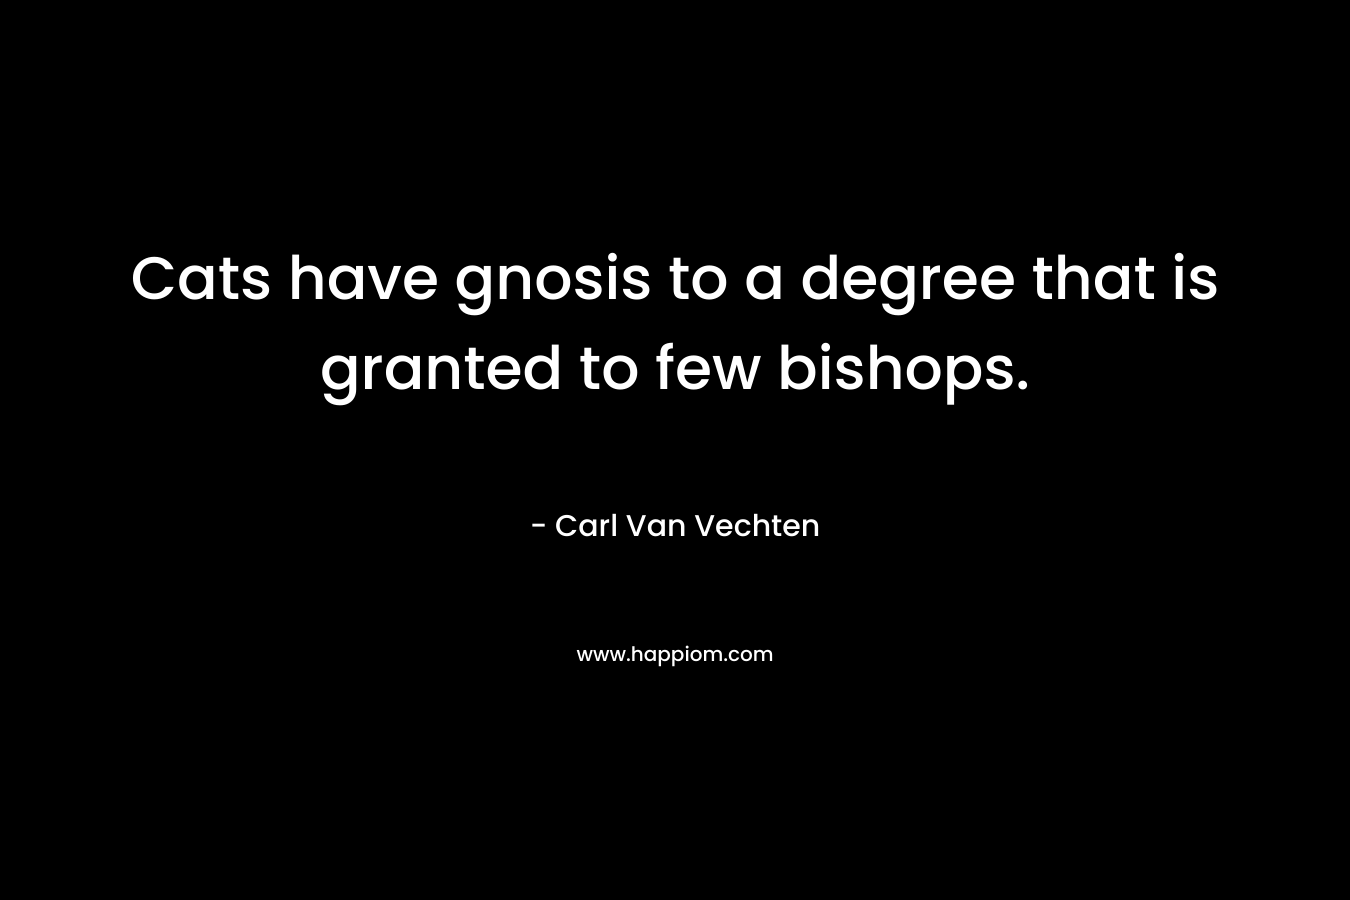 Cats have gnosis to a degree that is granted to few bishops. – Carl Van Vechten